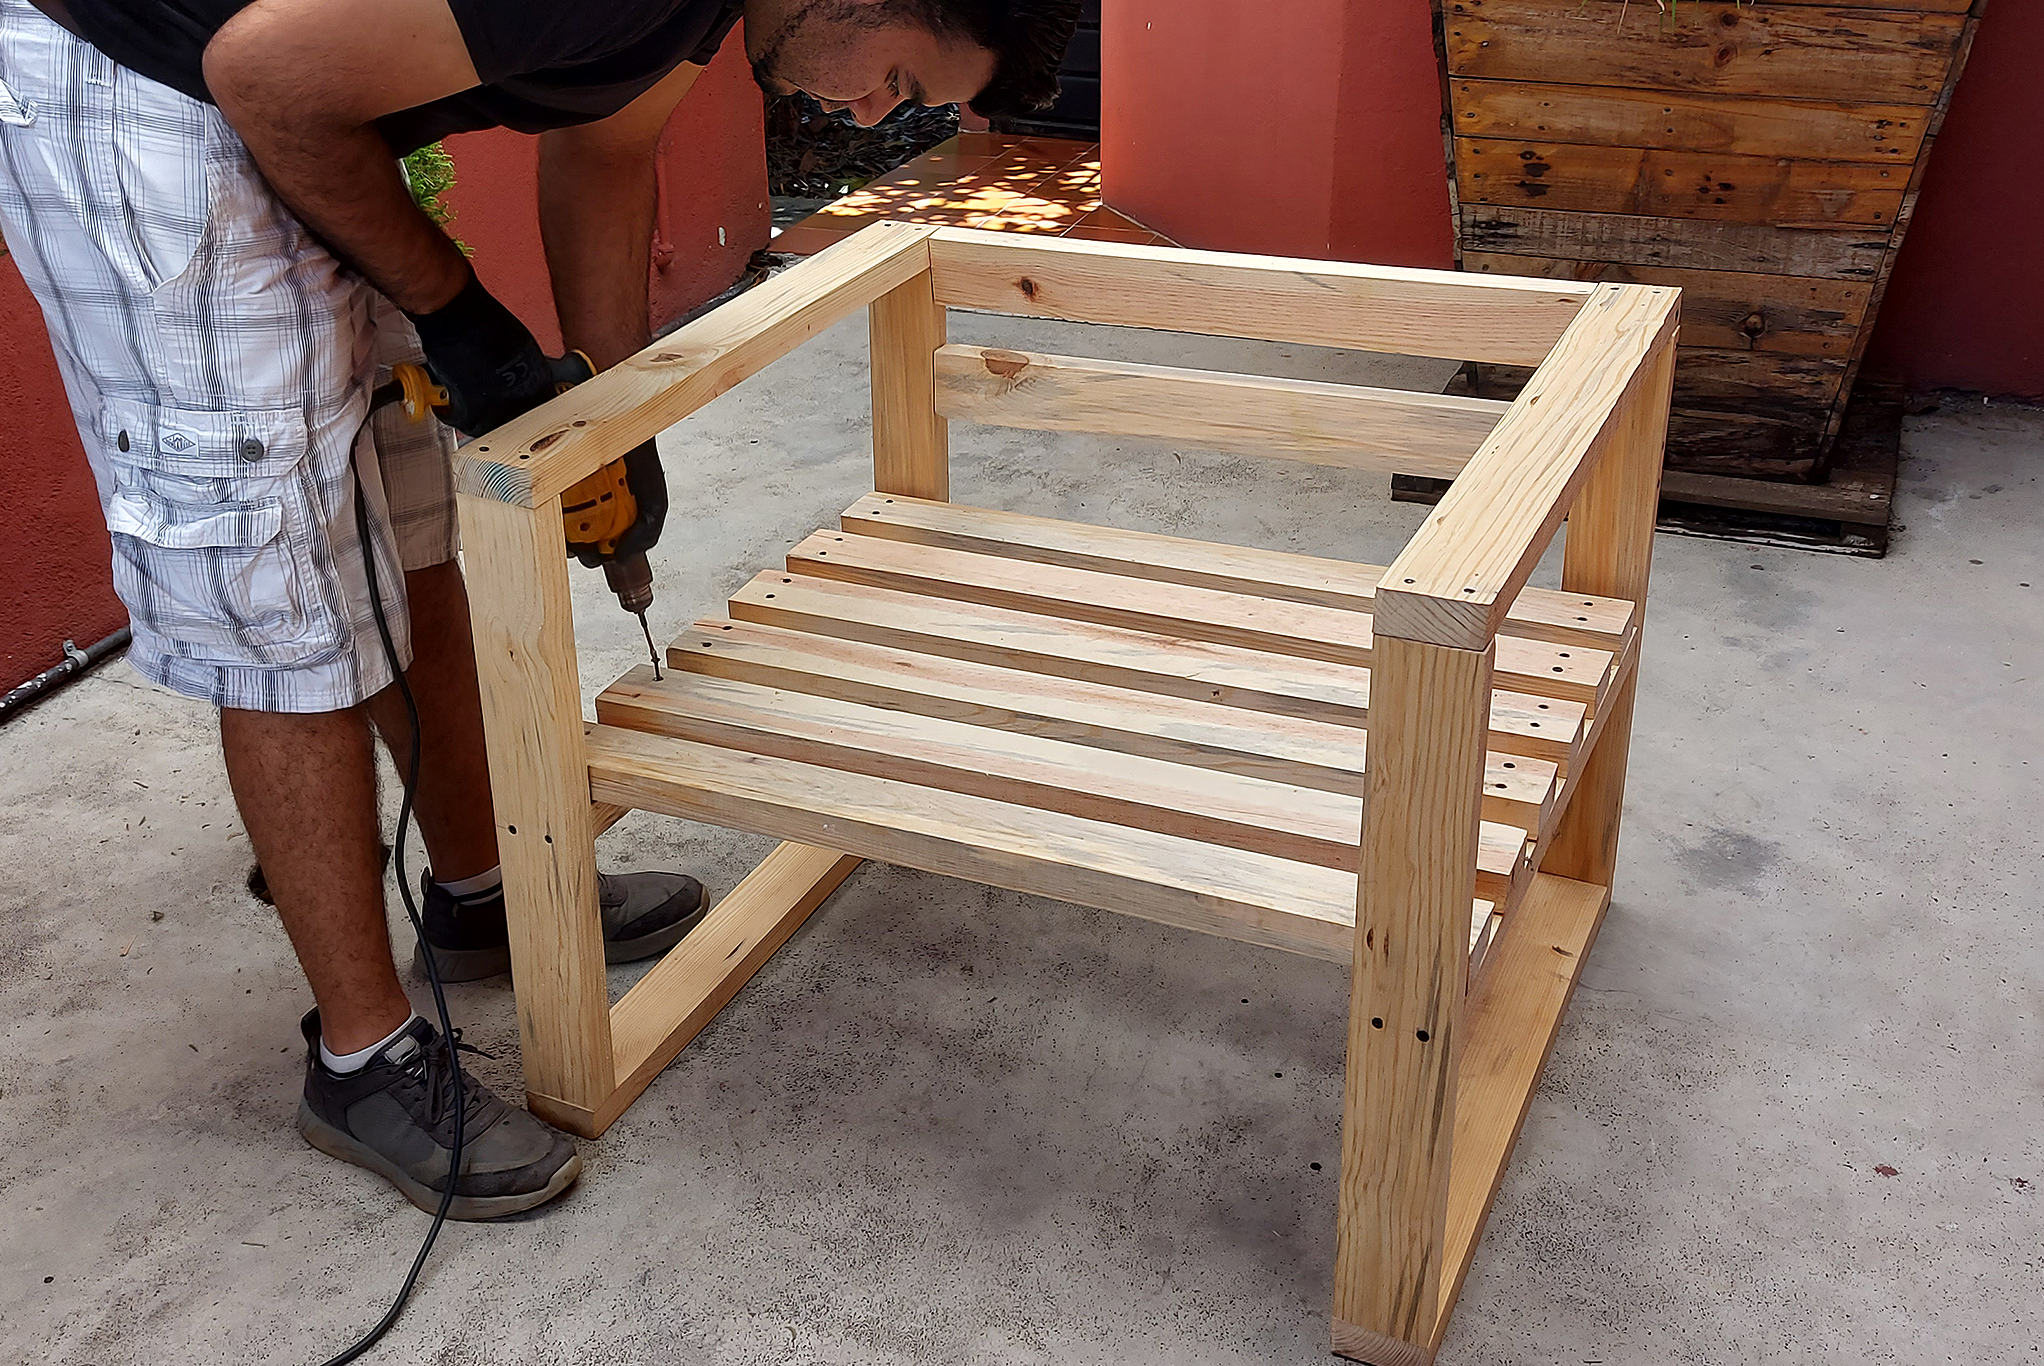 Instructables_Wooden_Chair_Seat_04.png